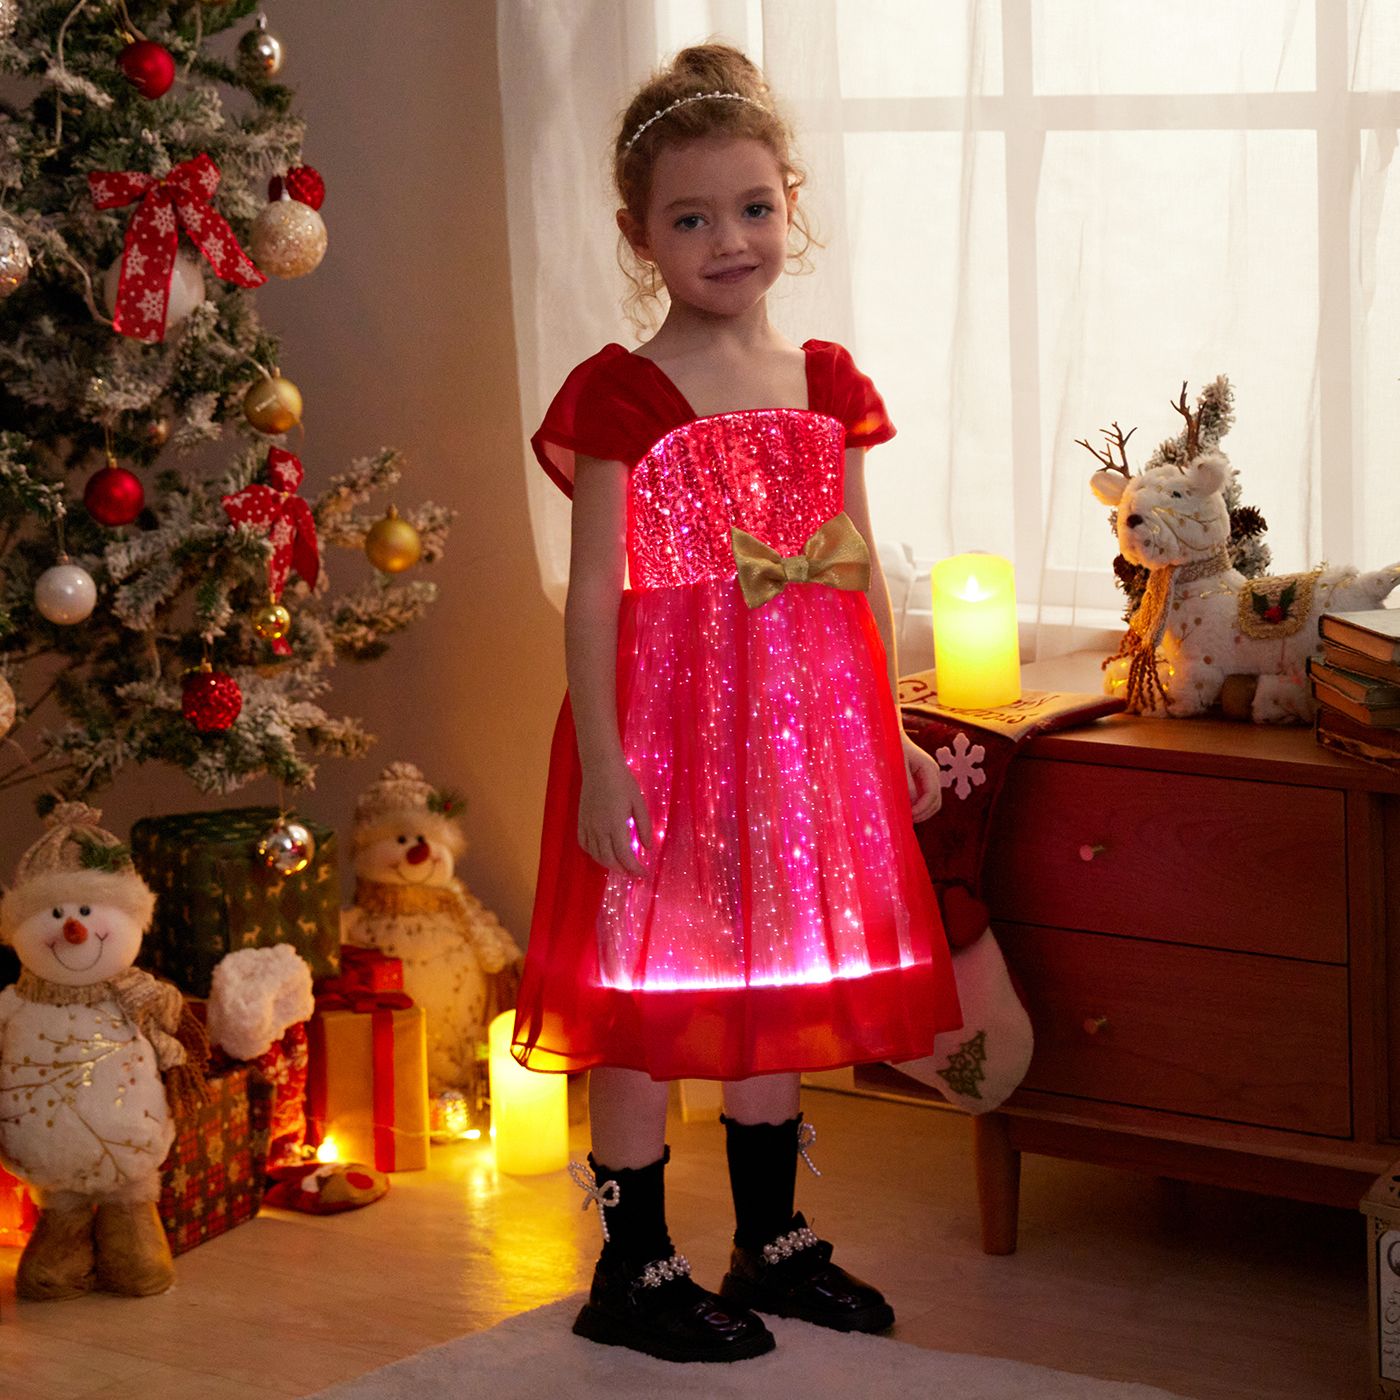 Go-Glow Christmas Illuminating Dress With Light Up Skirt Including Controller (Built-In Battery)